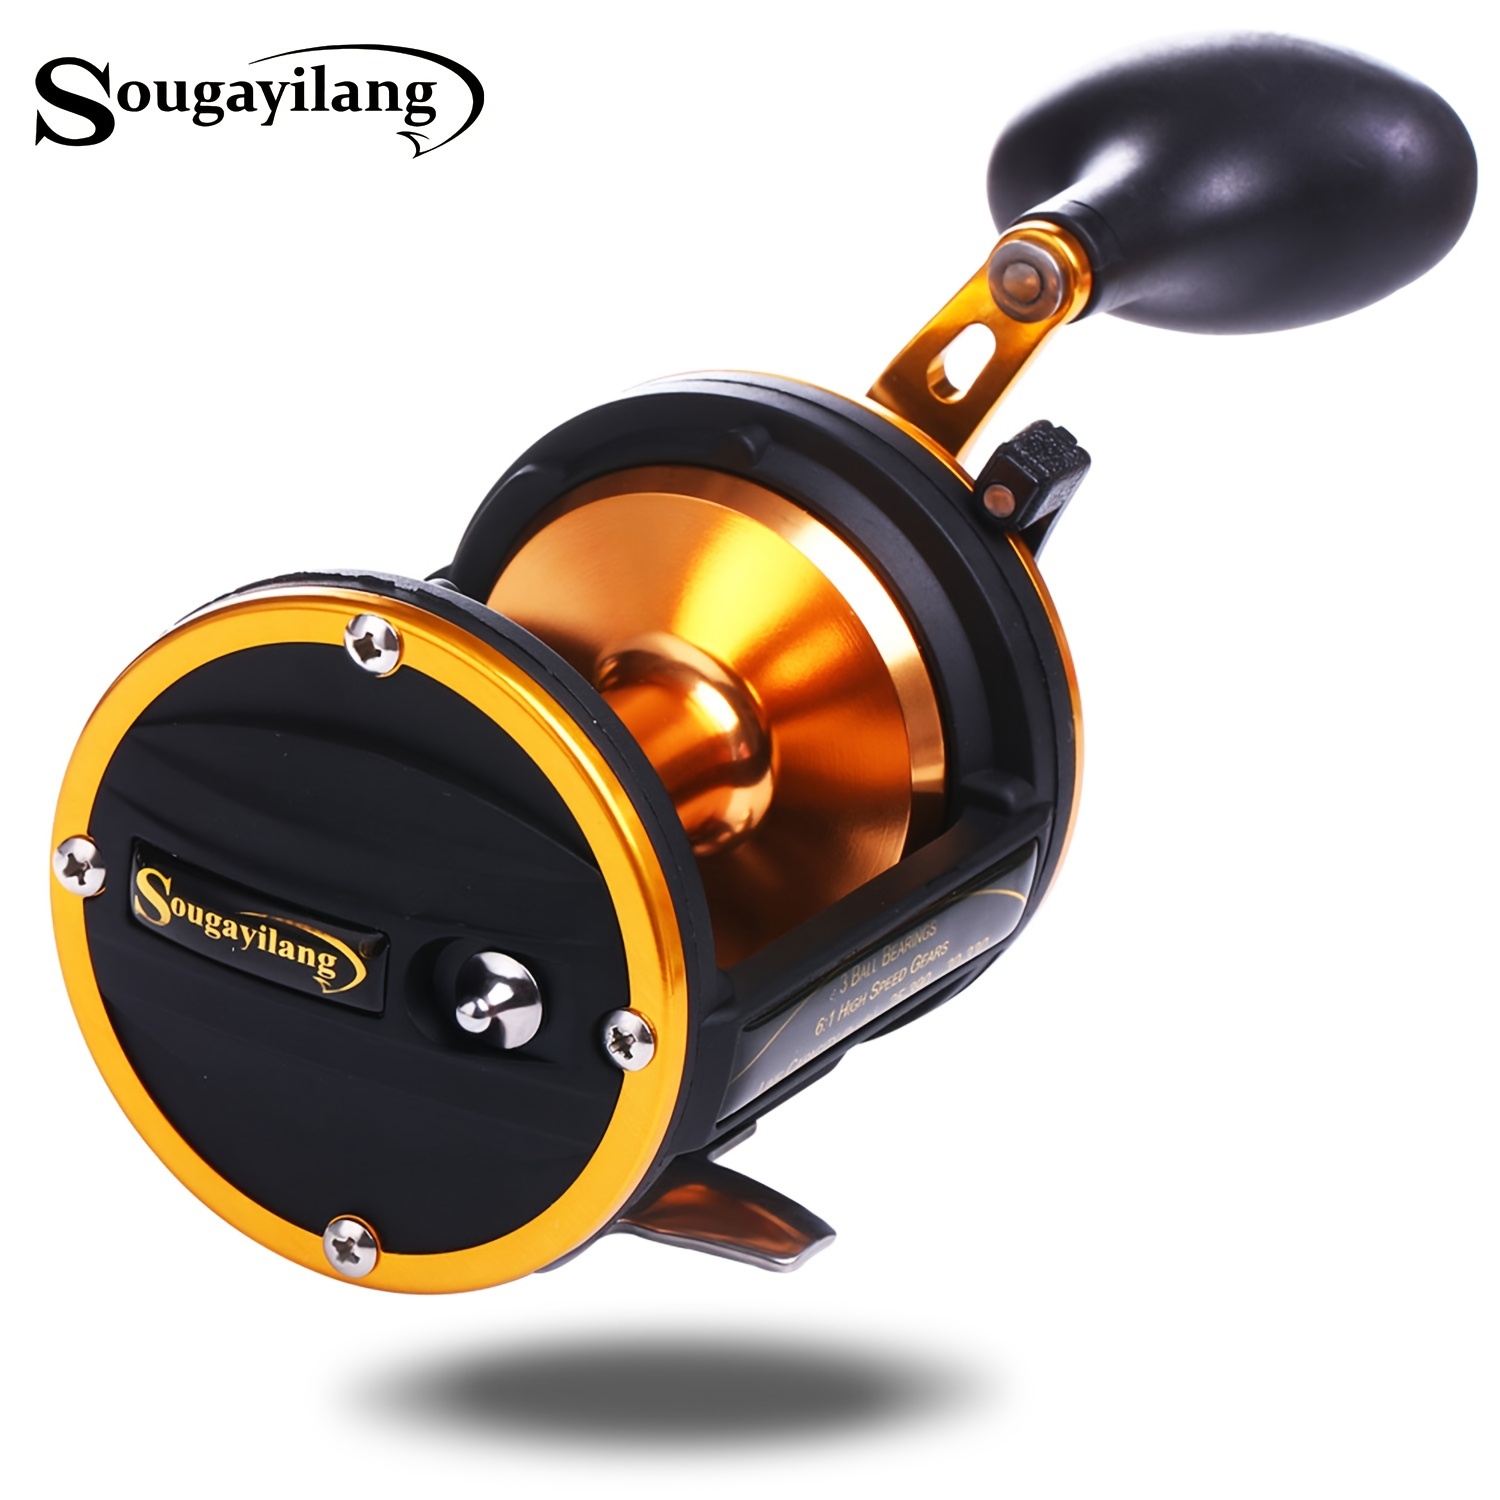 Sougayilang Trolling Fishing Reel - Strong and Reliable Bait Casting Drum  Wheel for Saltwater Fishing (Right Hand)